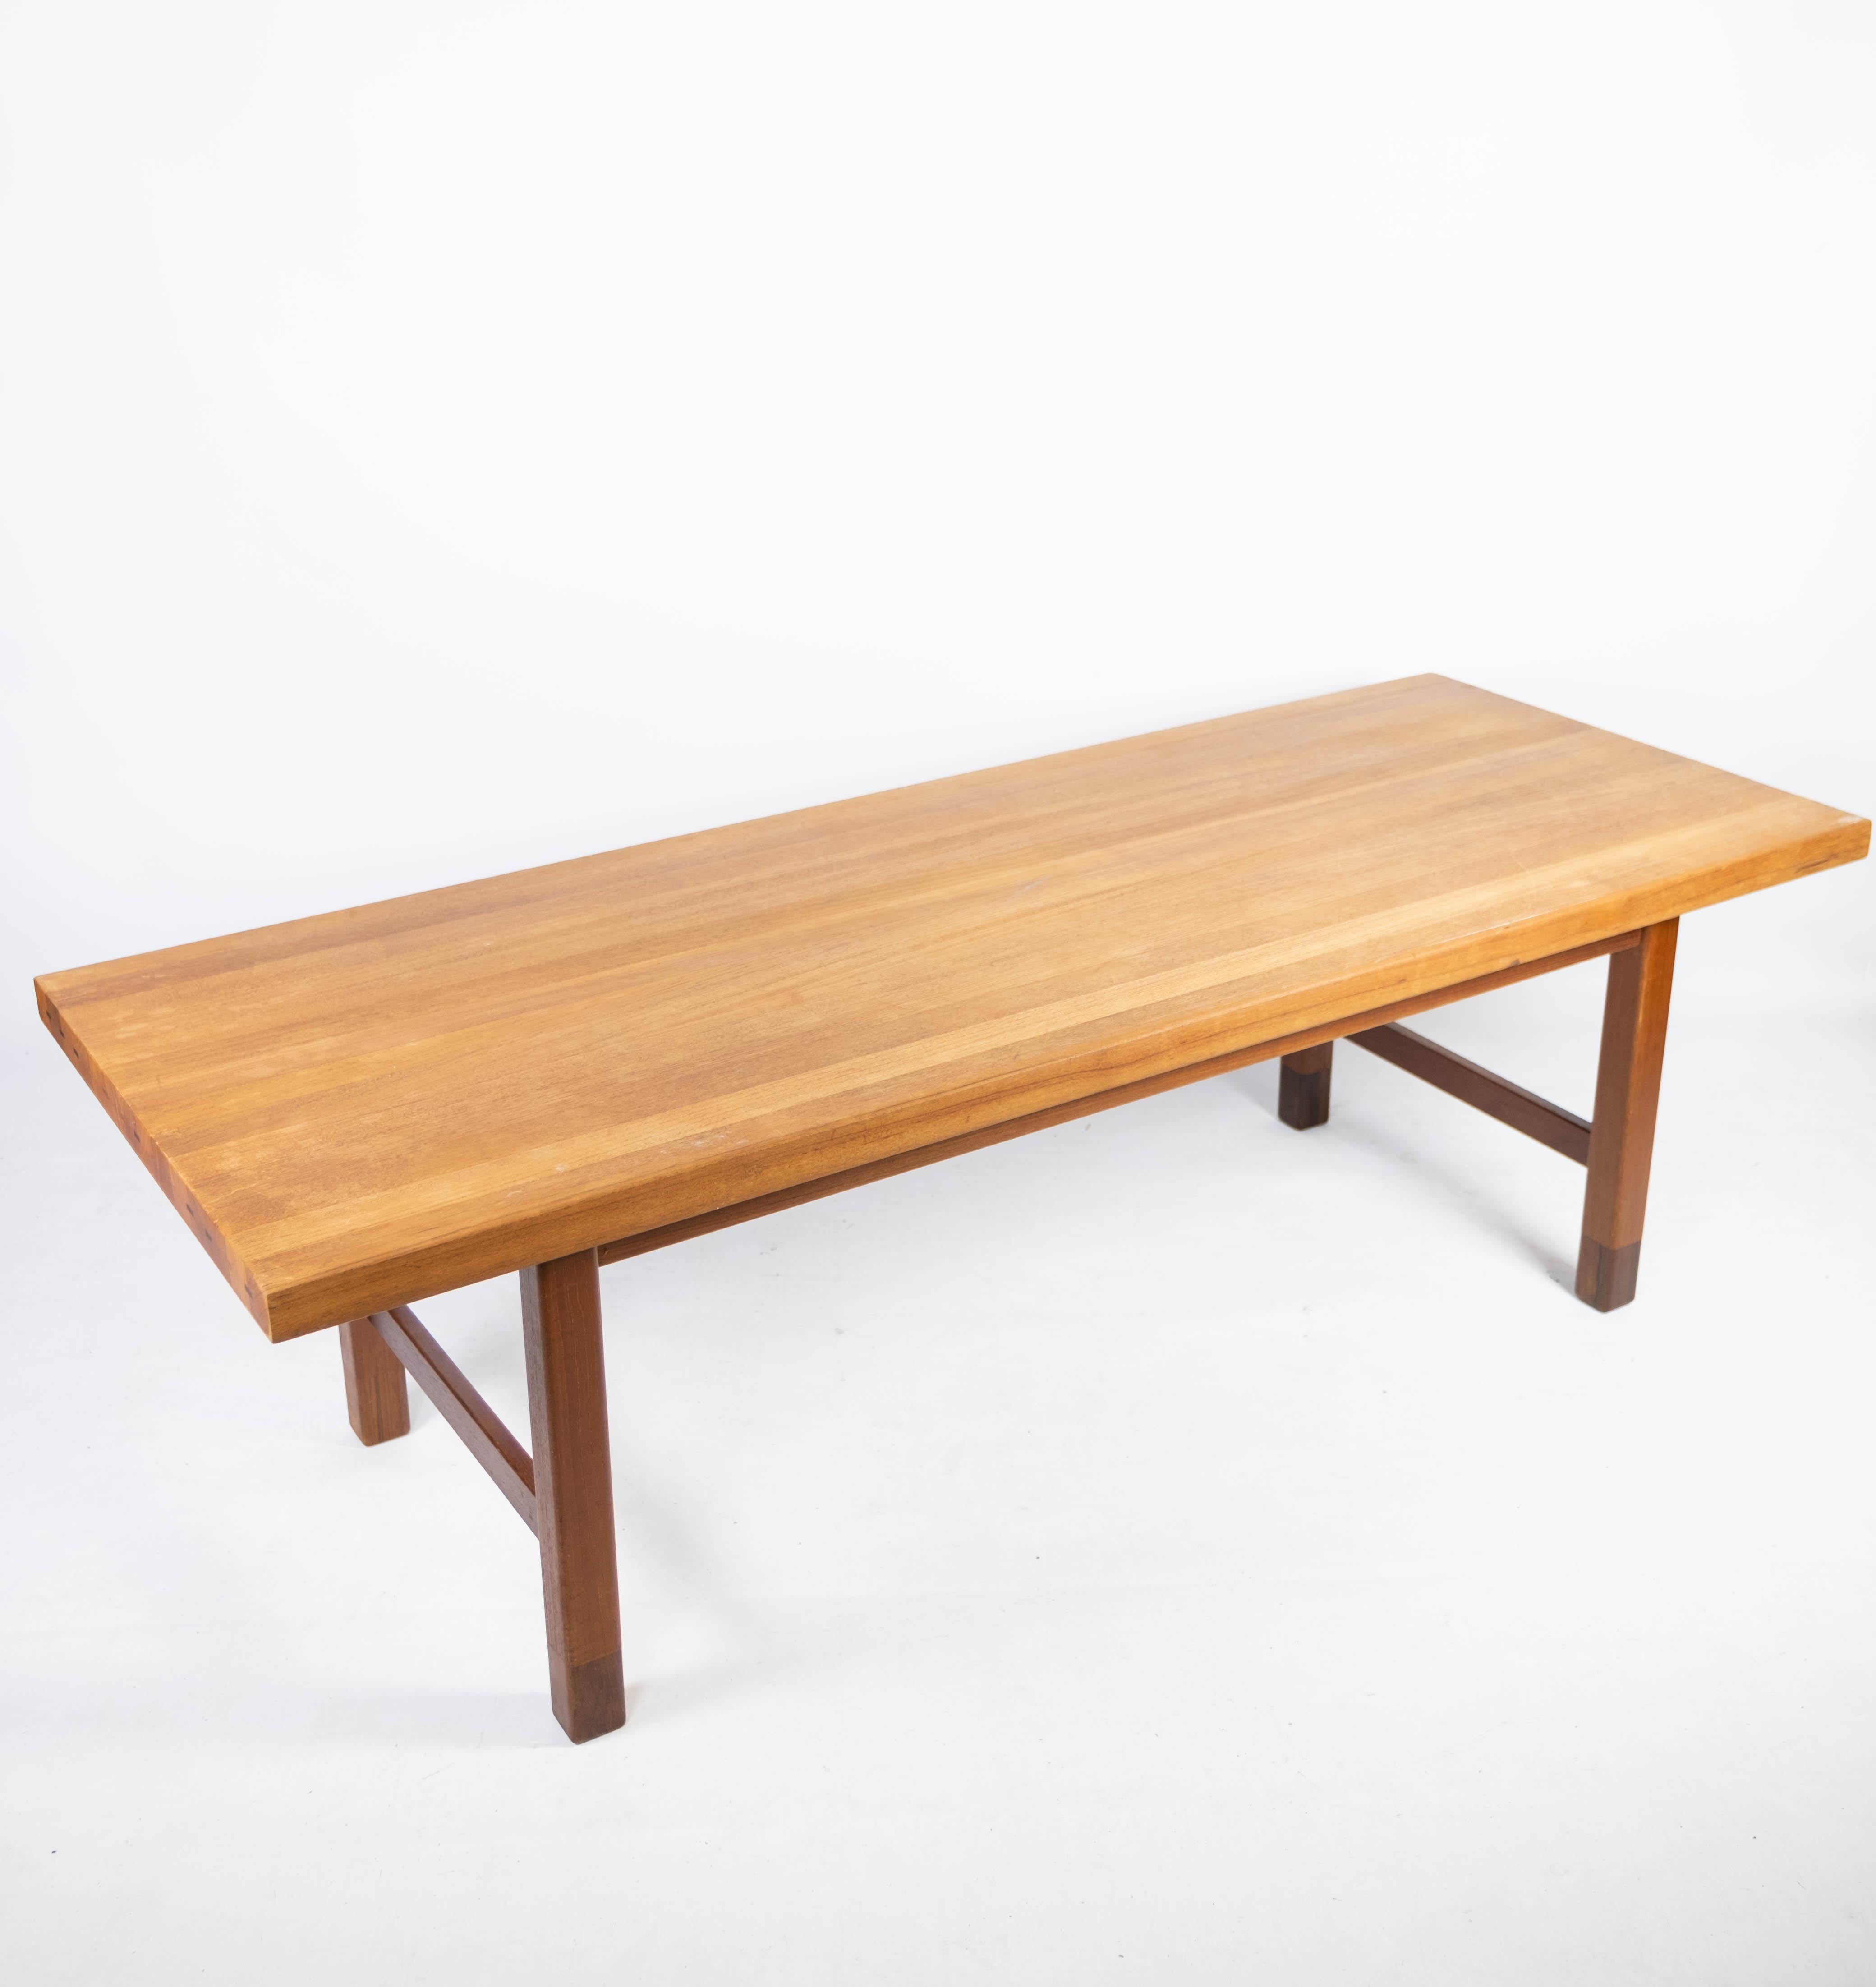 This coffee table in teak from the 1960s is characterized by the excellent craftsmanship and timeless aesthetics that Edmund Jørgensen Møbelfabrik is known for. With its elegant design and beautiful wooden structure, the table adds a warm and